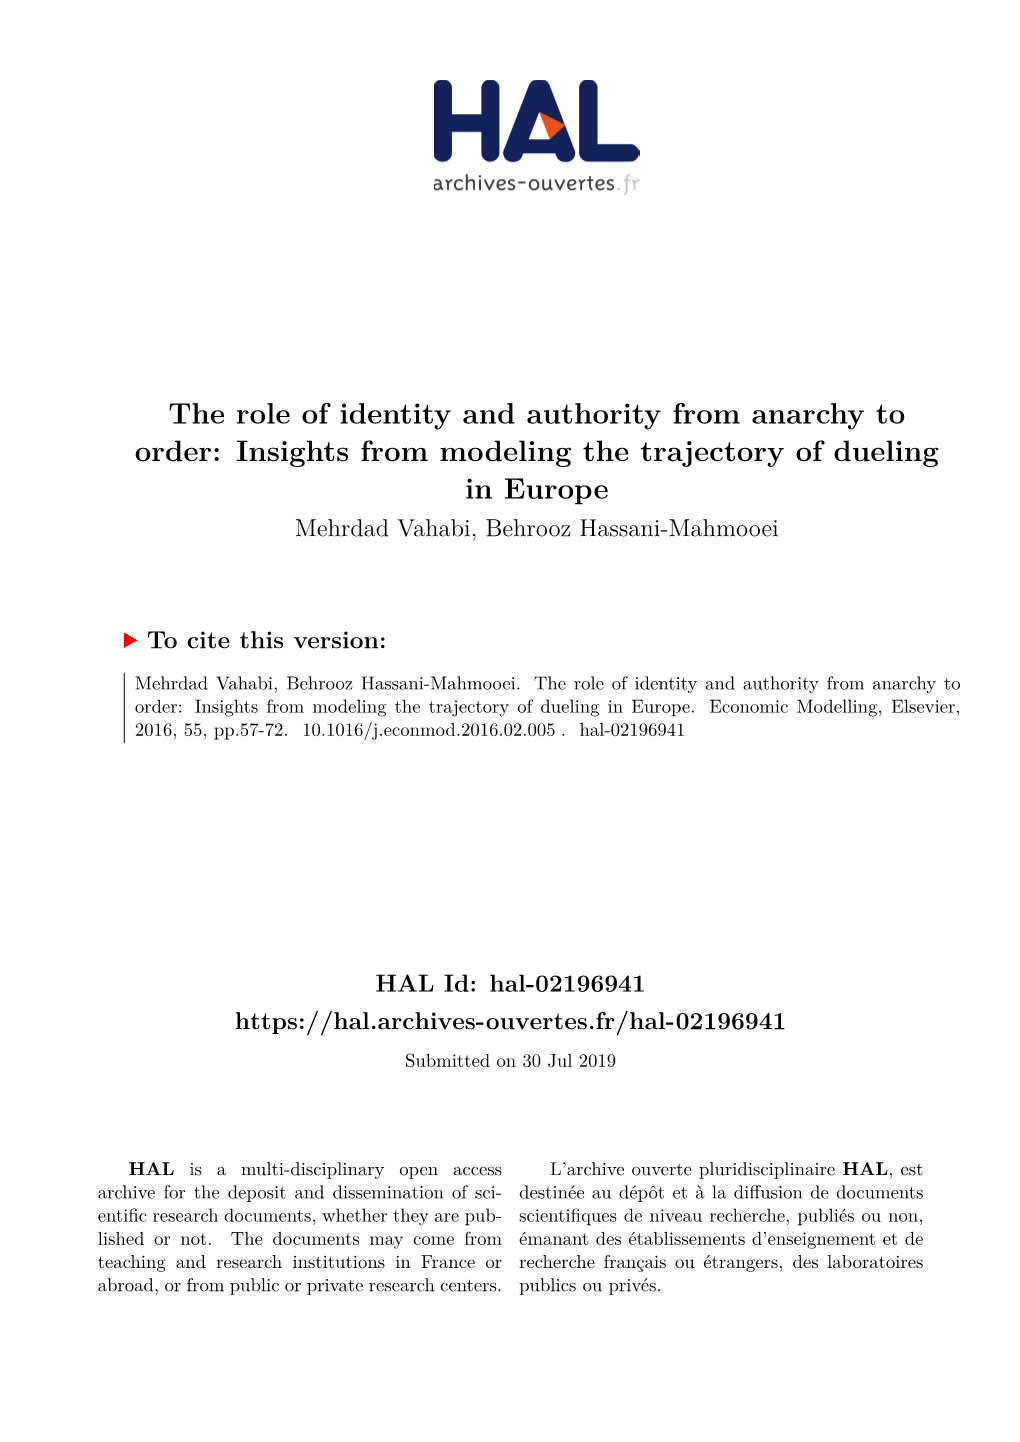 The Role of Identity and Authority from Anarchy to Order: Insights from Modeling the Trajectory of Dueling in Europe Mehrdad Vahabi, Behrooz Hassani-Mahmooei